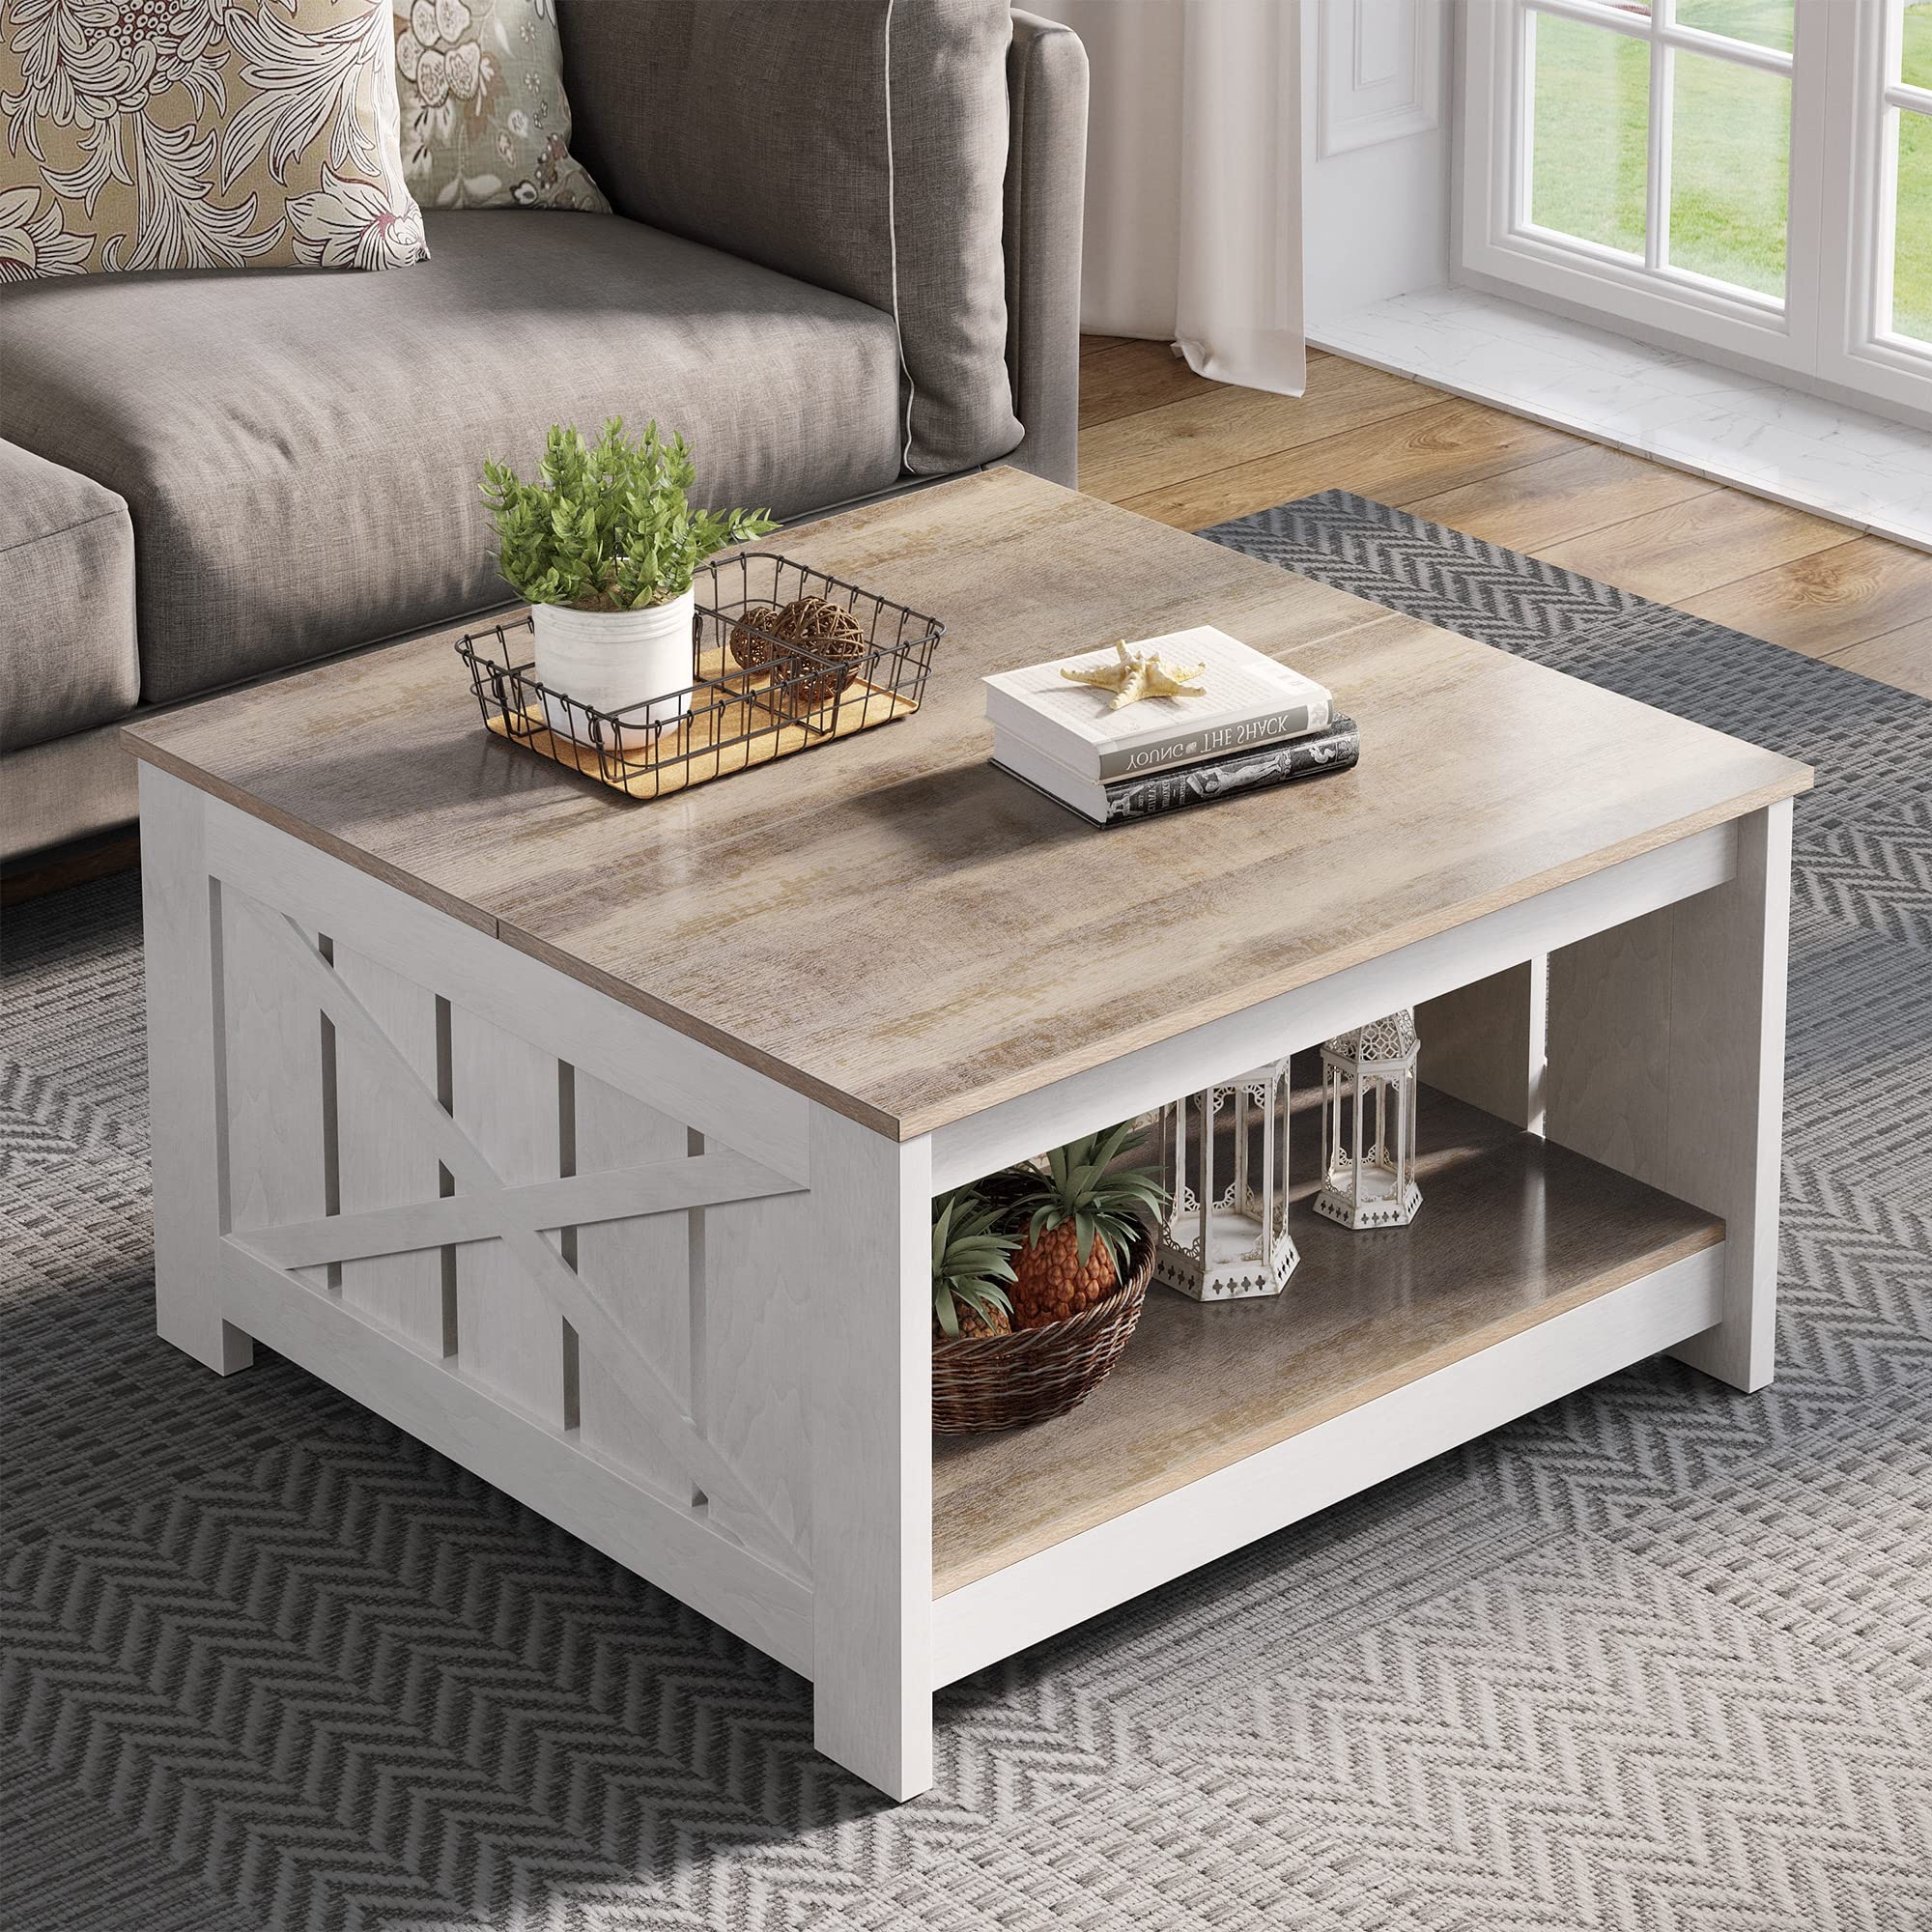 Amazon.com: YITAHOME Coffee Table Farmhouse Coffee Table with Storage Rustic Wood Cocktail Table,Square Coffee Table for Living Meeting Room with Half Open Storage Compartment,Grey Wash : Home & Kitch